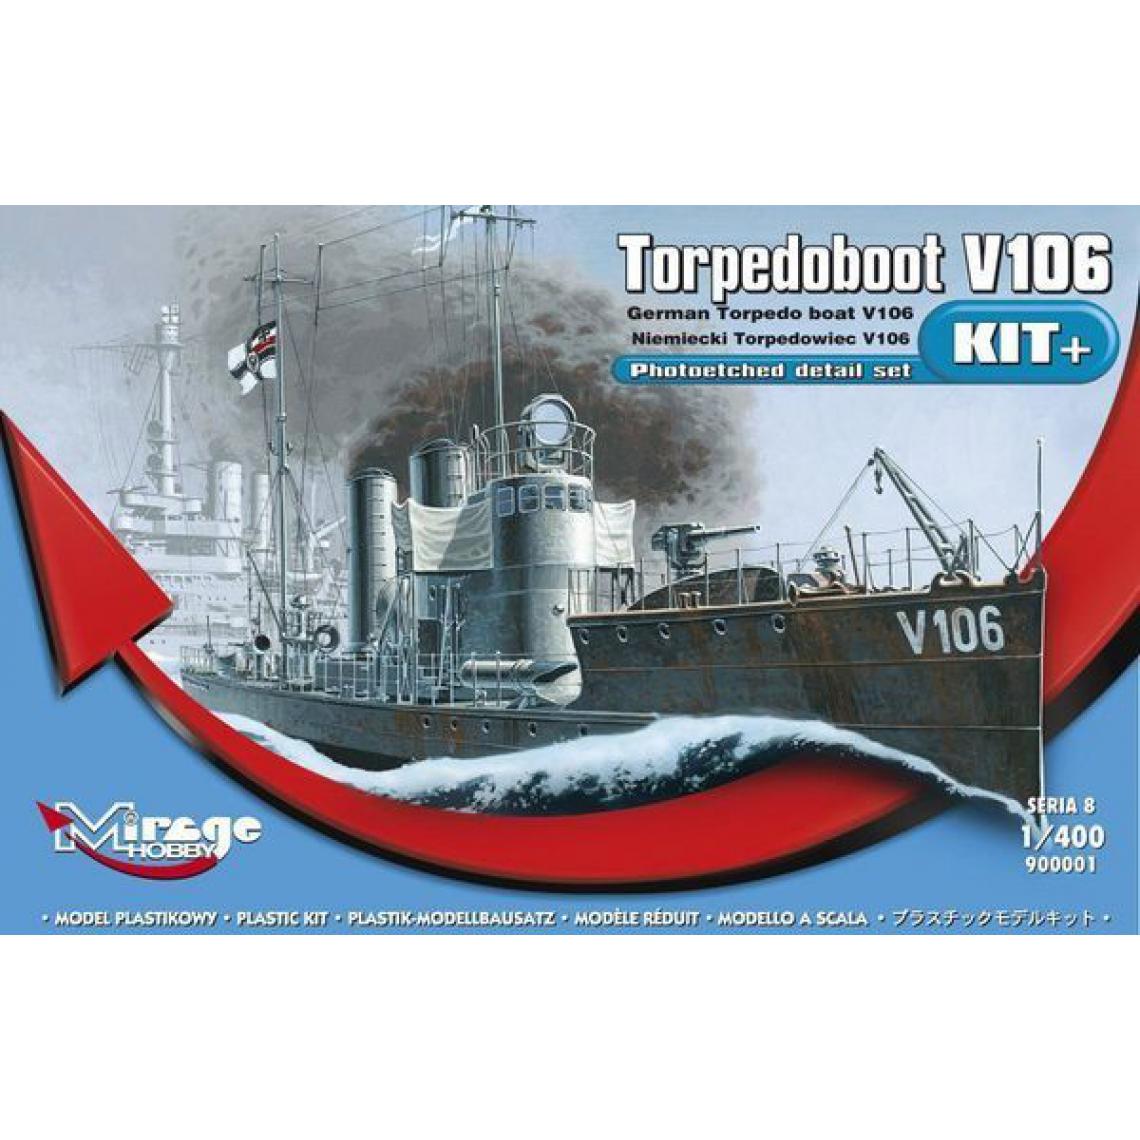 Mirage Hobby - Torpedoboot V106 - 1:400e - Mirage Hobby - Accessoires et pièces